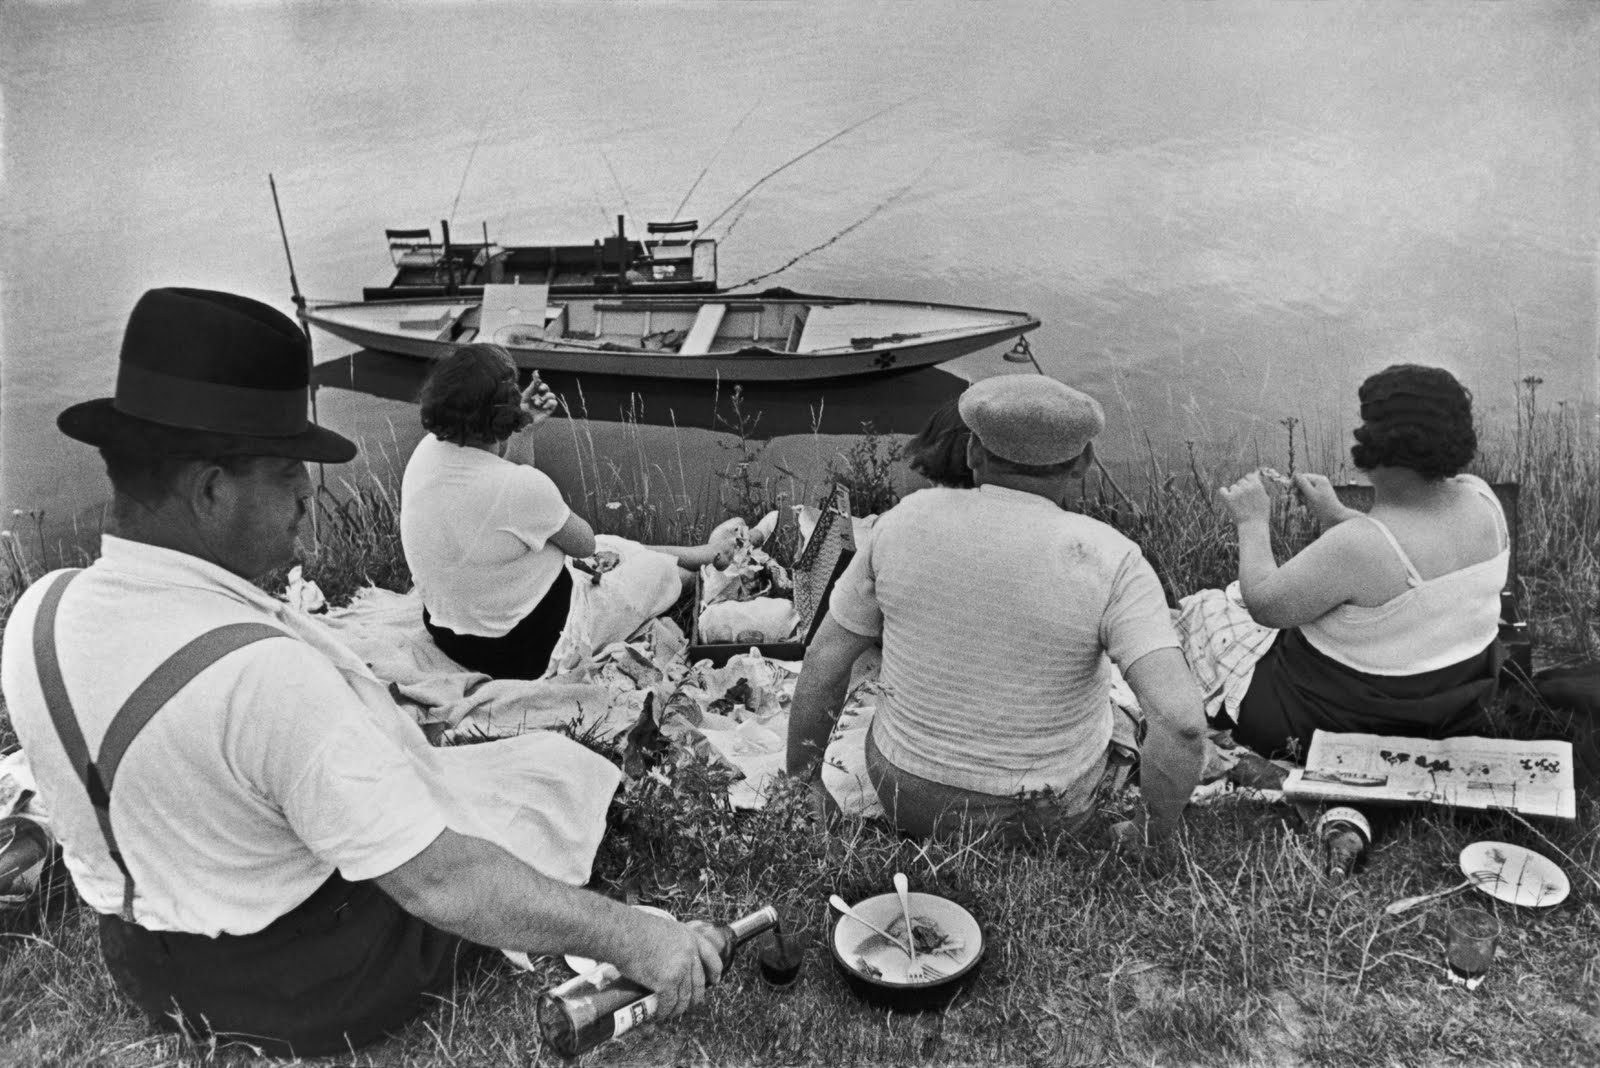 FRANCE. 1938.Sunday on the banks of the River Marne.